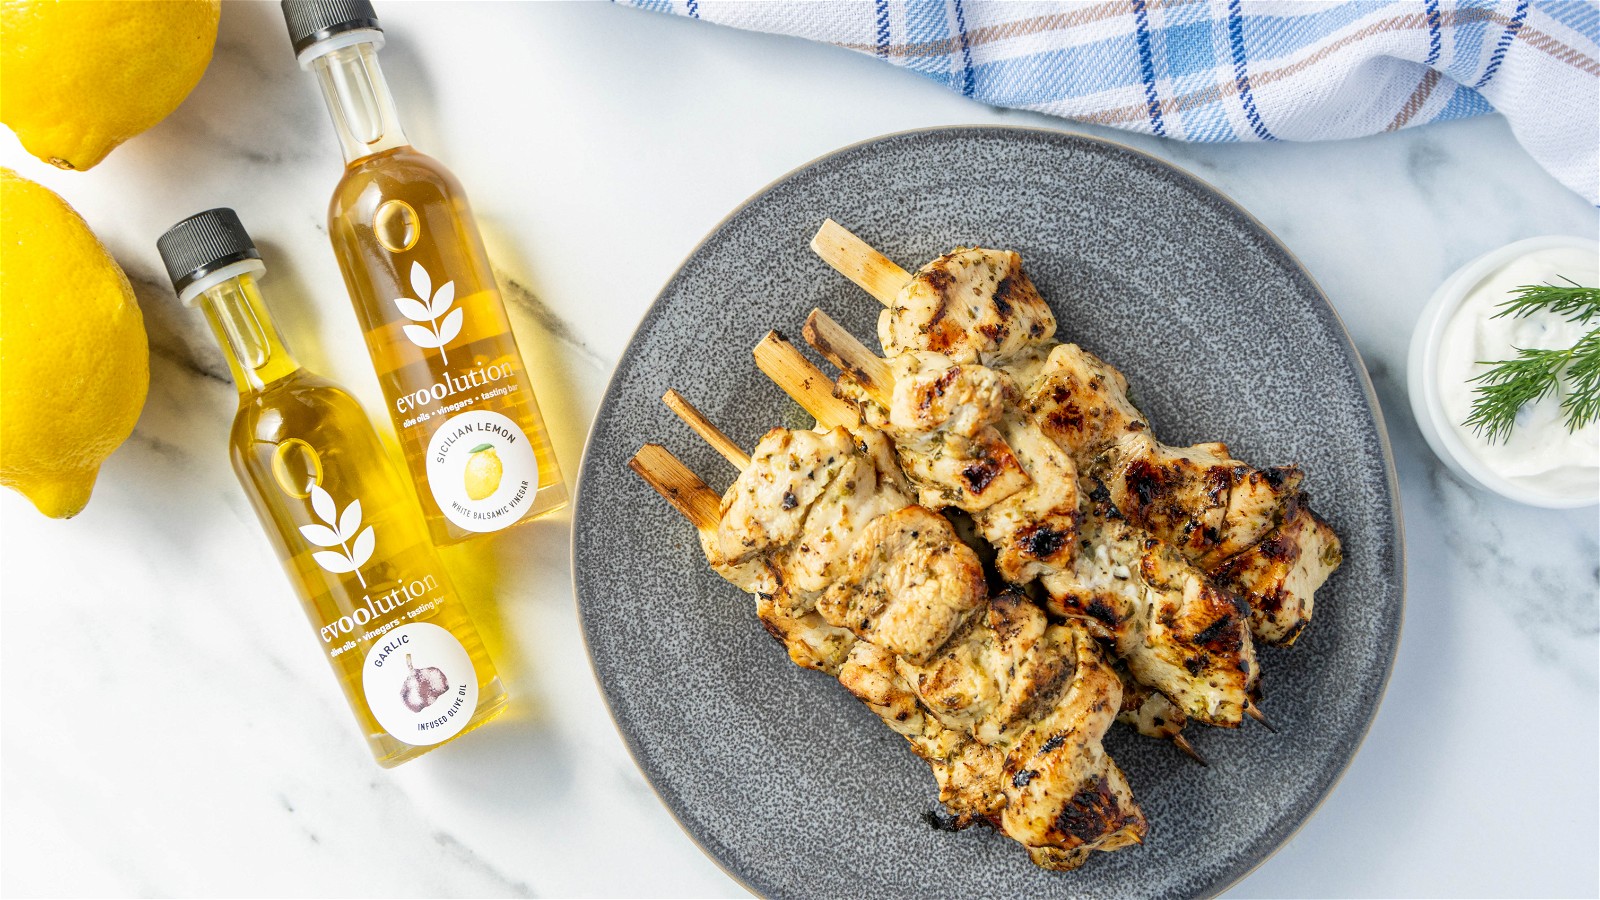 Image of Greek Chicken Skewers with Garlic Olive Oil and Sicilian Lemon Balsamic